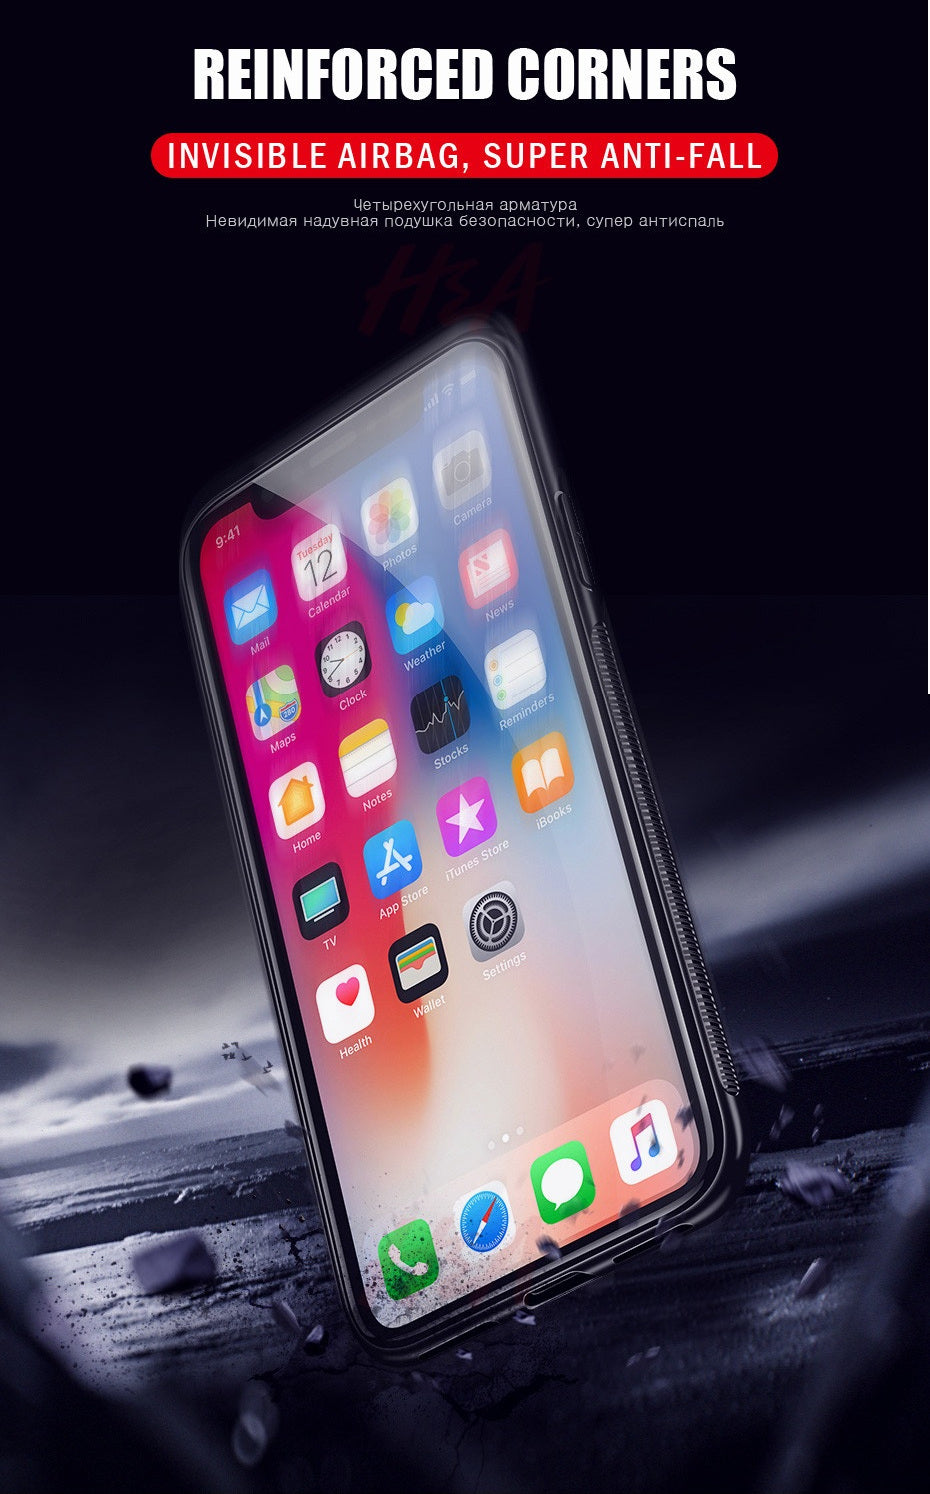 Luxury Tempered Glass Back Hybrid Case Soft TPU Bumper Back Case Cover for Apple iPhone X / XS 2018